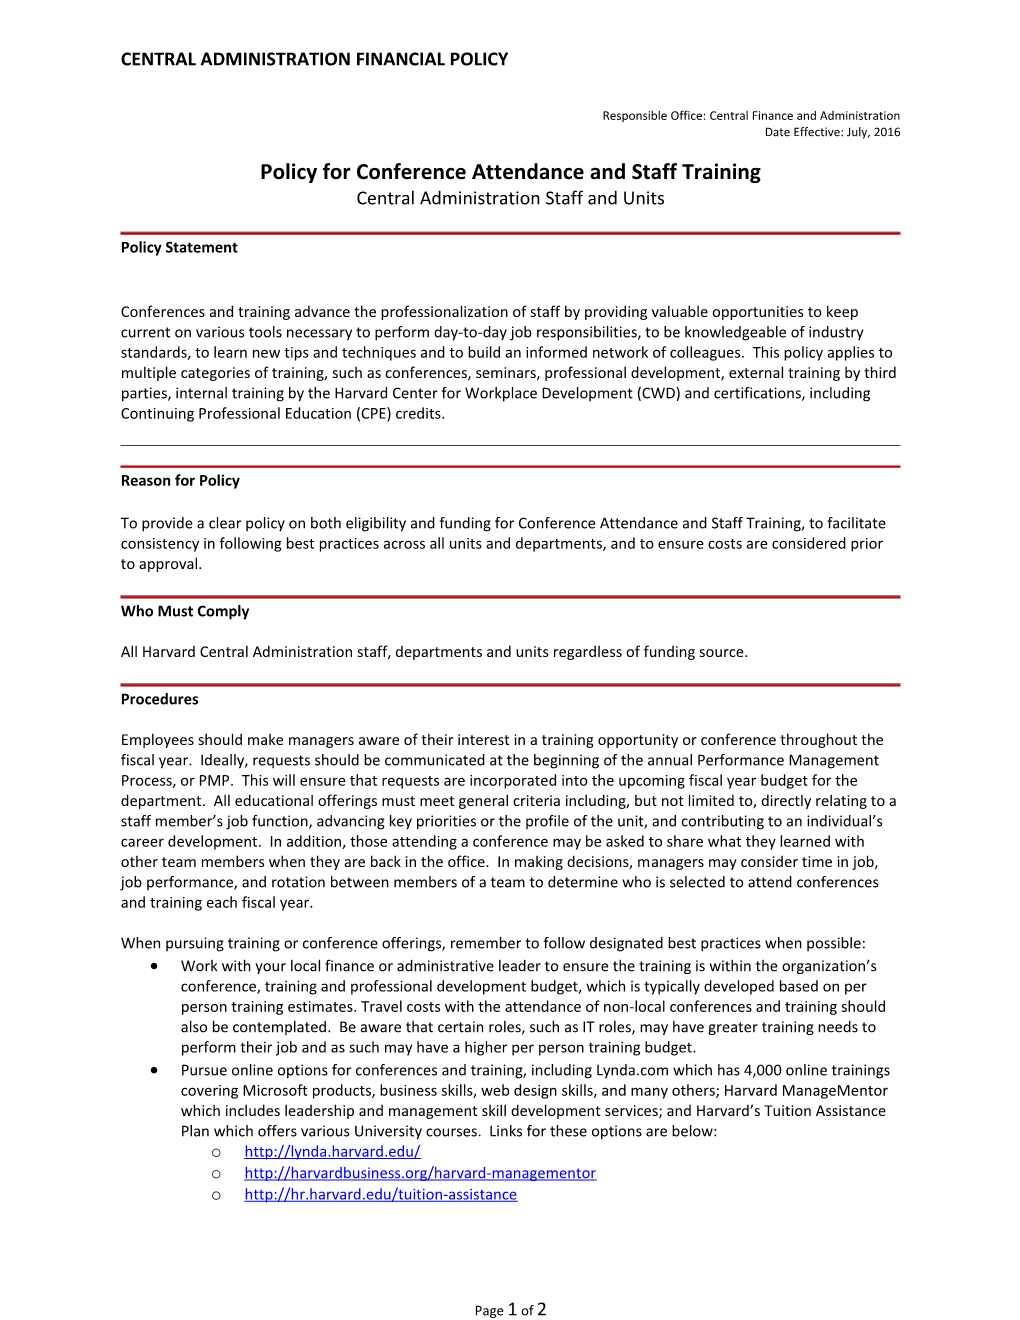 Policy for Conference Attendance and Staff Training